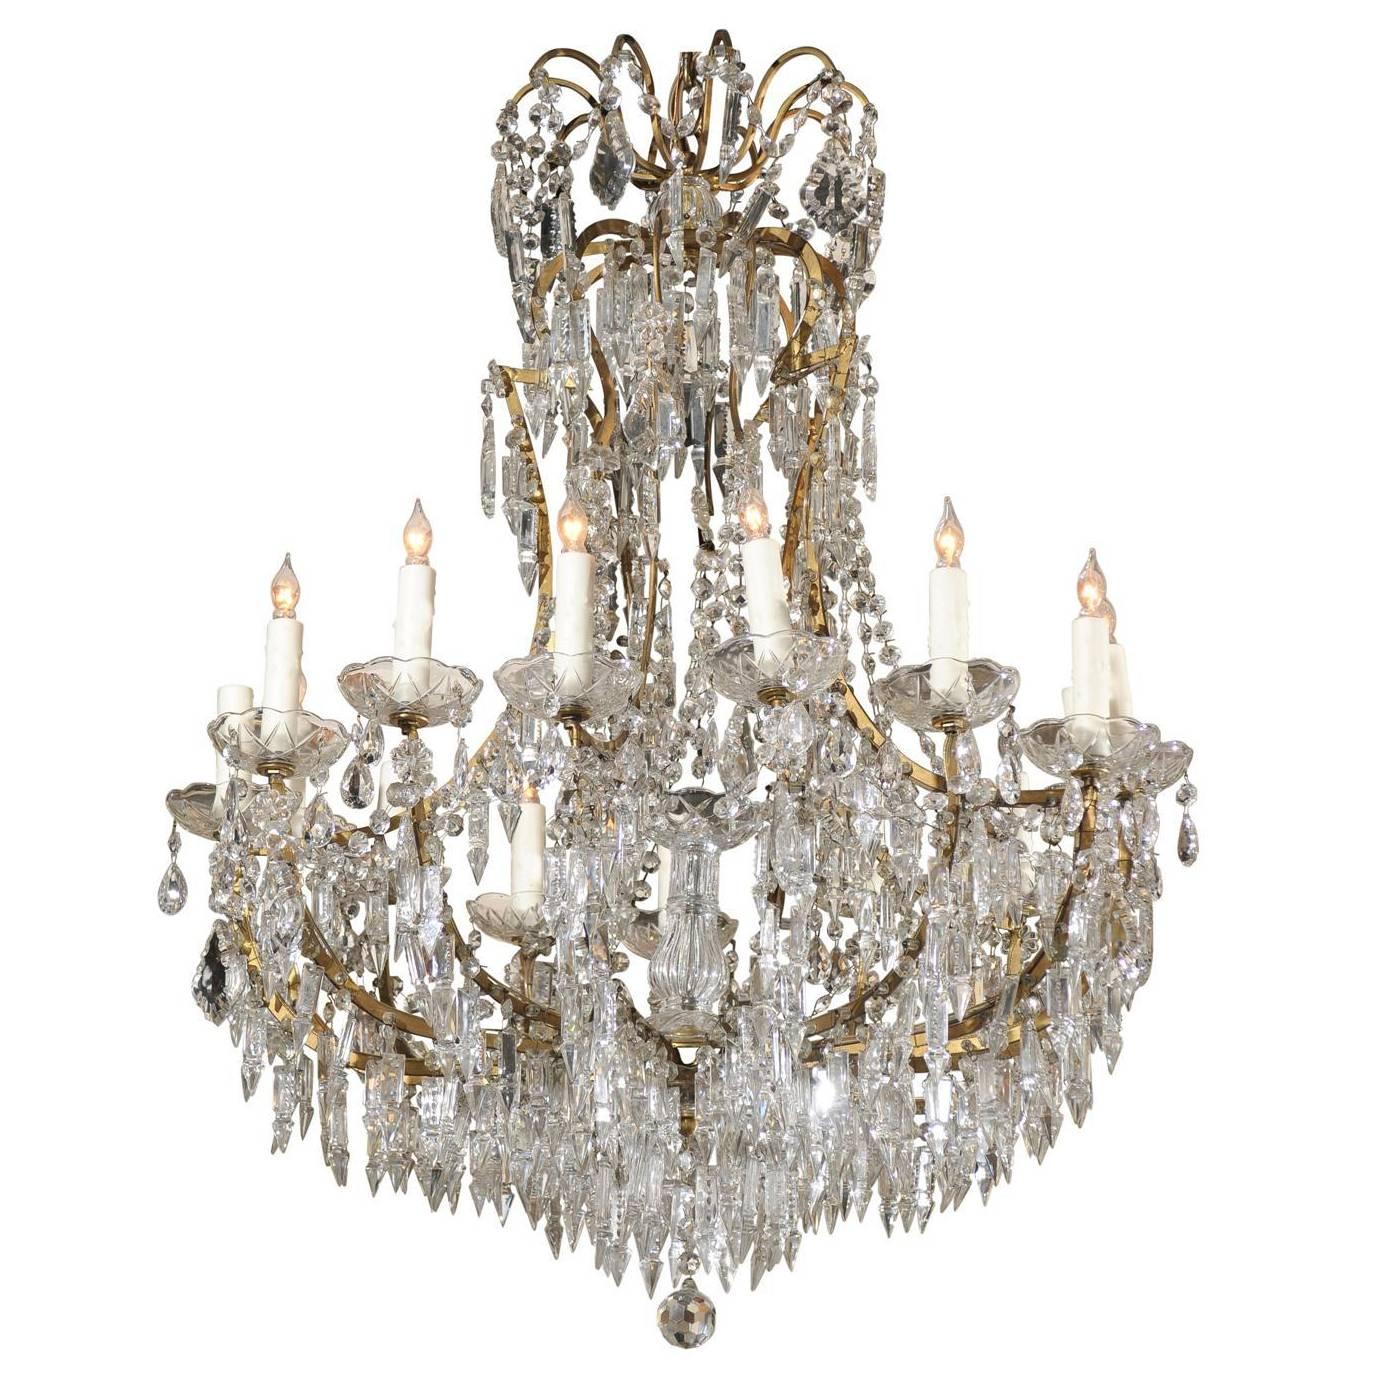 French Fifteen-Light Crystal Louis XV Style Chandelier from Early 20th Century